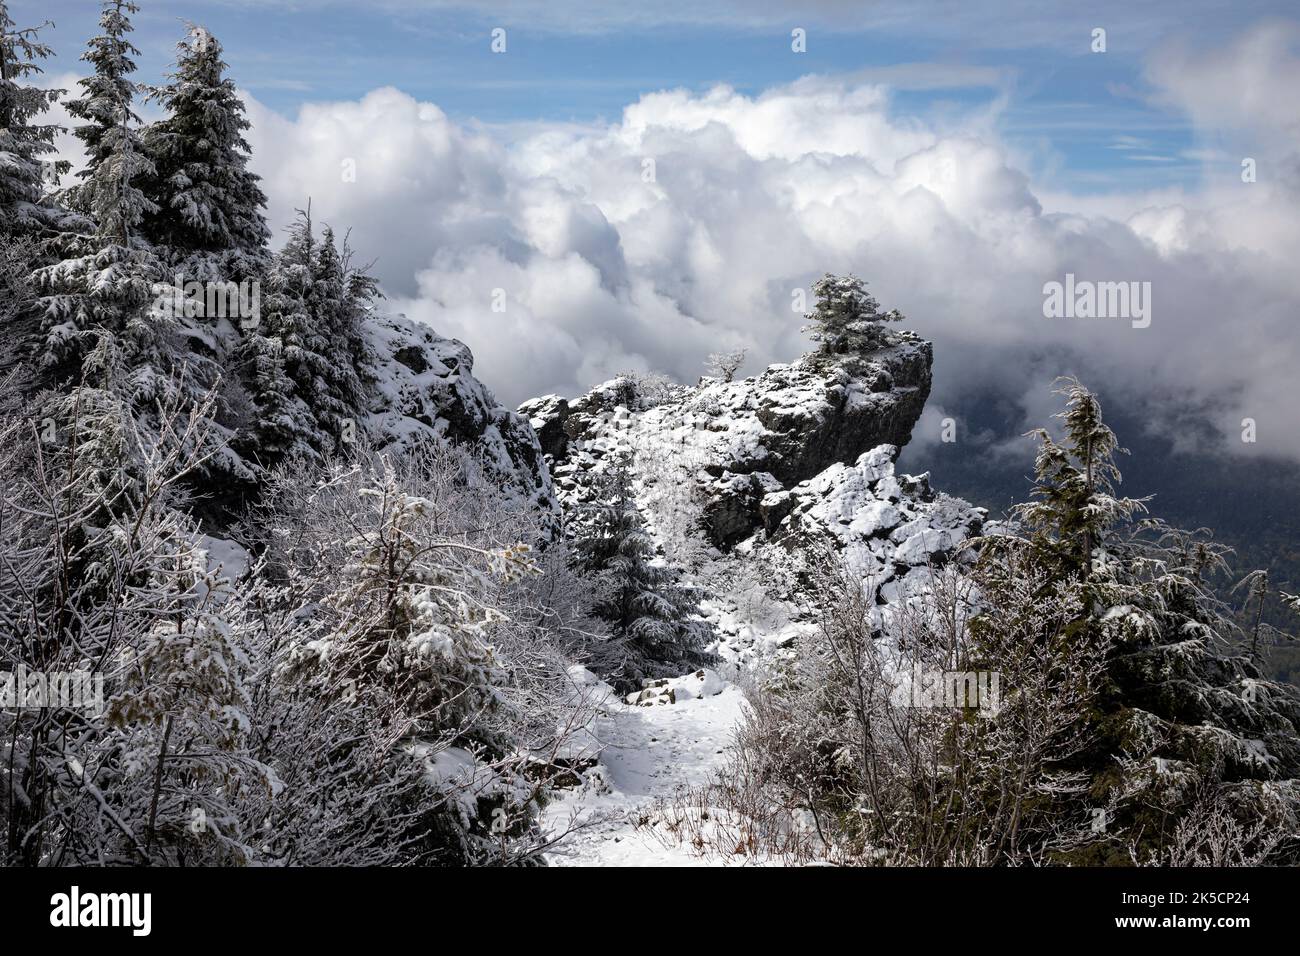 WA22171-00...WASHINGTON - Breaking Clouds during a Snow Storm near the Summit of Mount Si near North Bend. Stockfoto